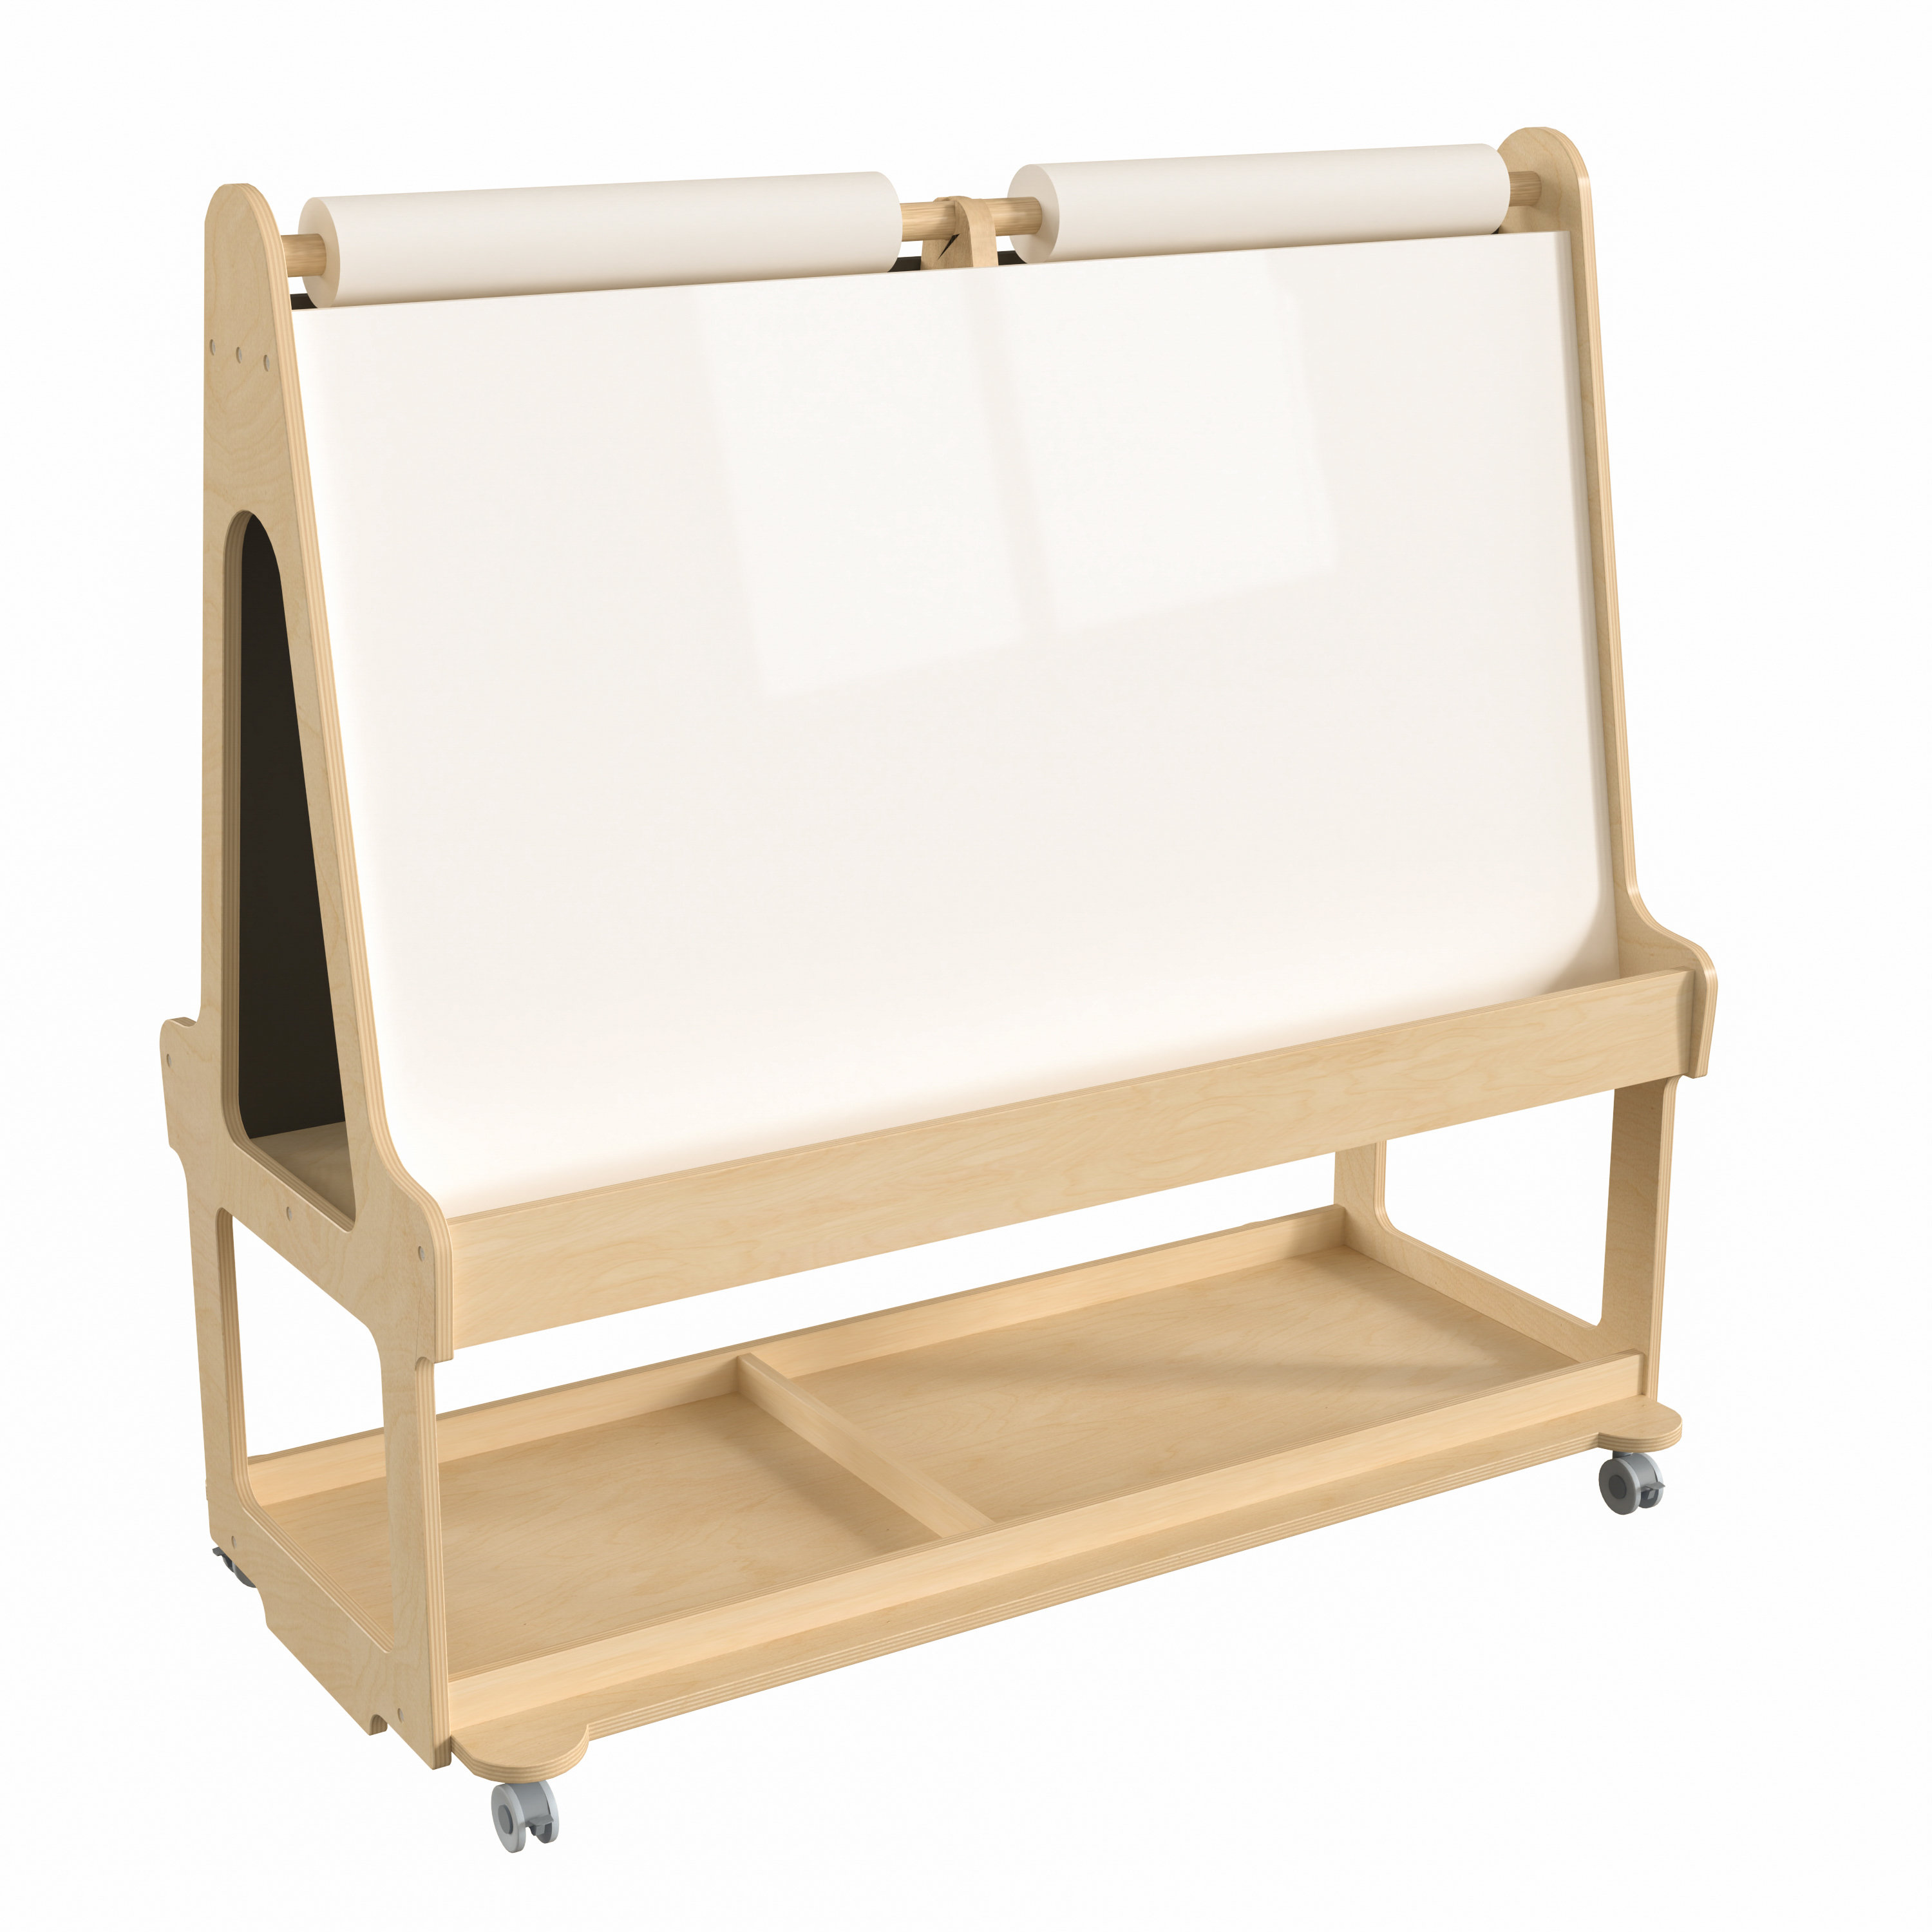 Magic Wooden Double-Sided Easel 2-in-1 Chalkboard and Dry Erase